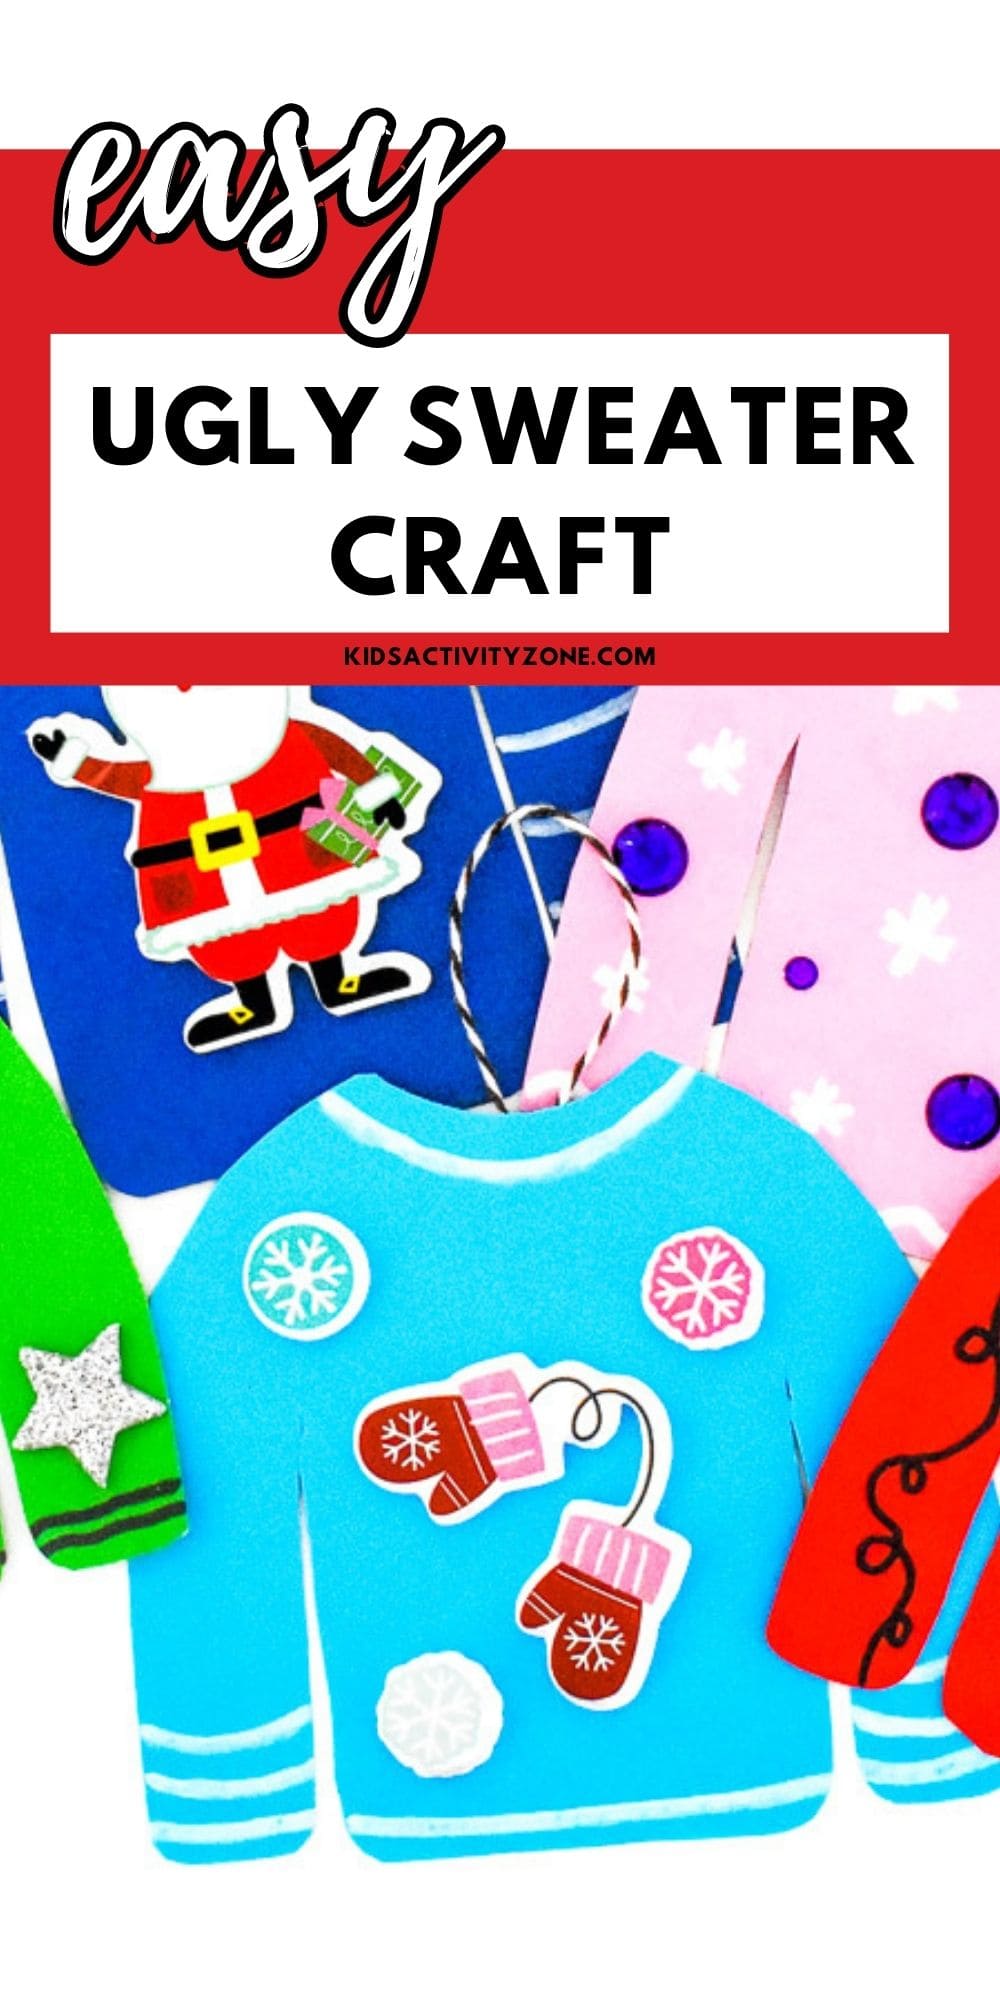 If you are having a holiday party and need a fun activity or craft make this Ugly Sweater Craft. Simply cut the sweater out from the template and decorate it! They can be made into ornaments to keep. Everyone need a homemade ornament to keep and cherish!